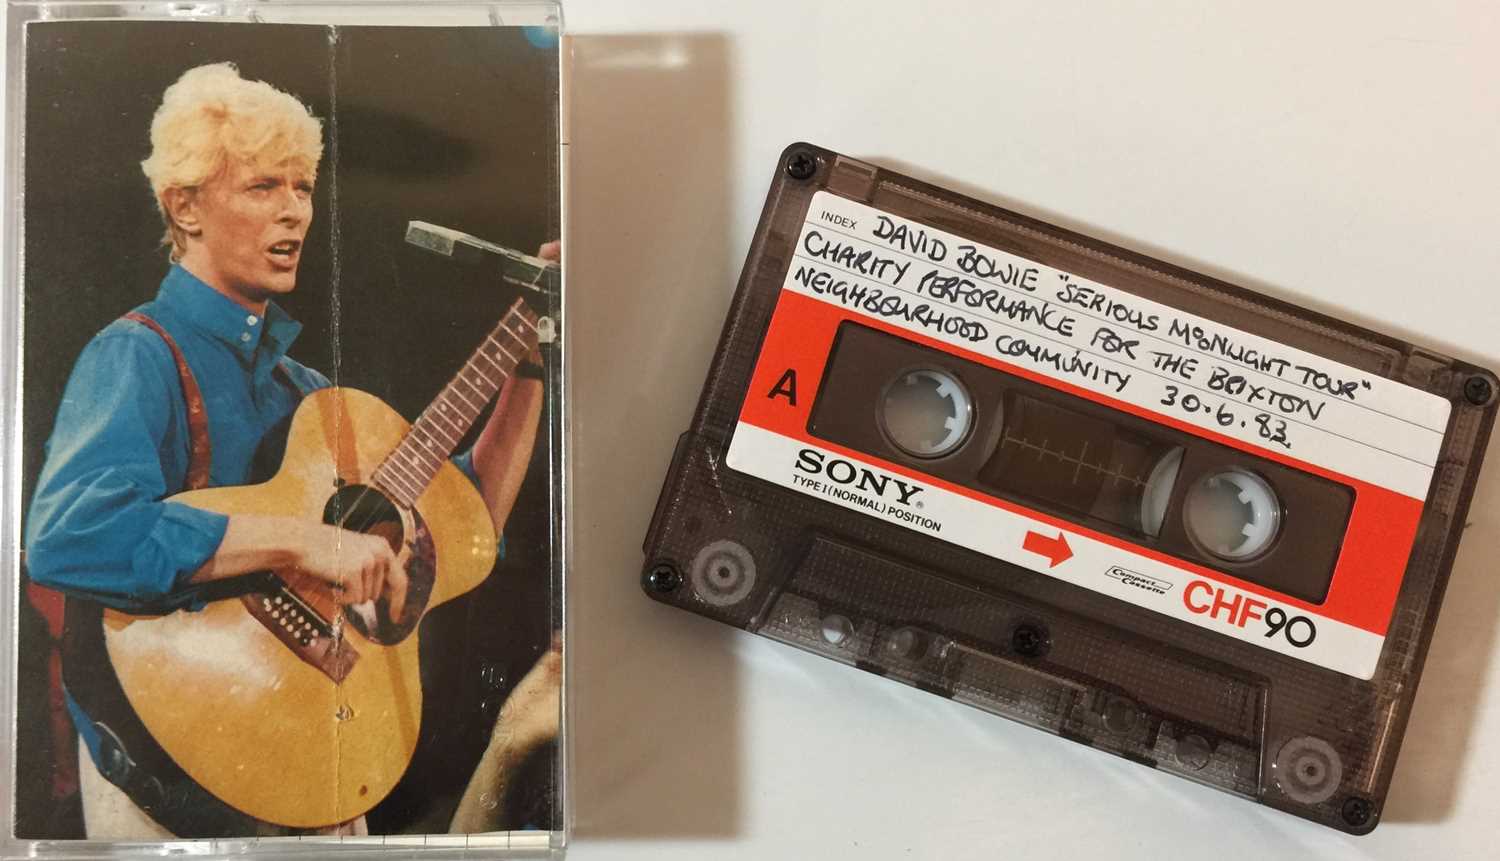 David Bowie - Cassette Collection Including Abbey Road Studio Demo - Image 2 of 5